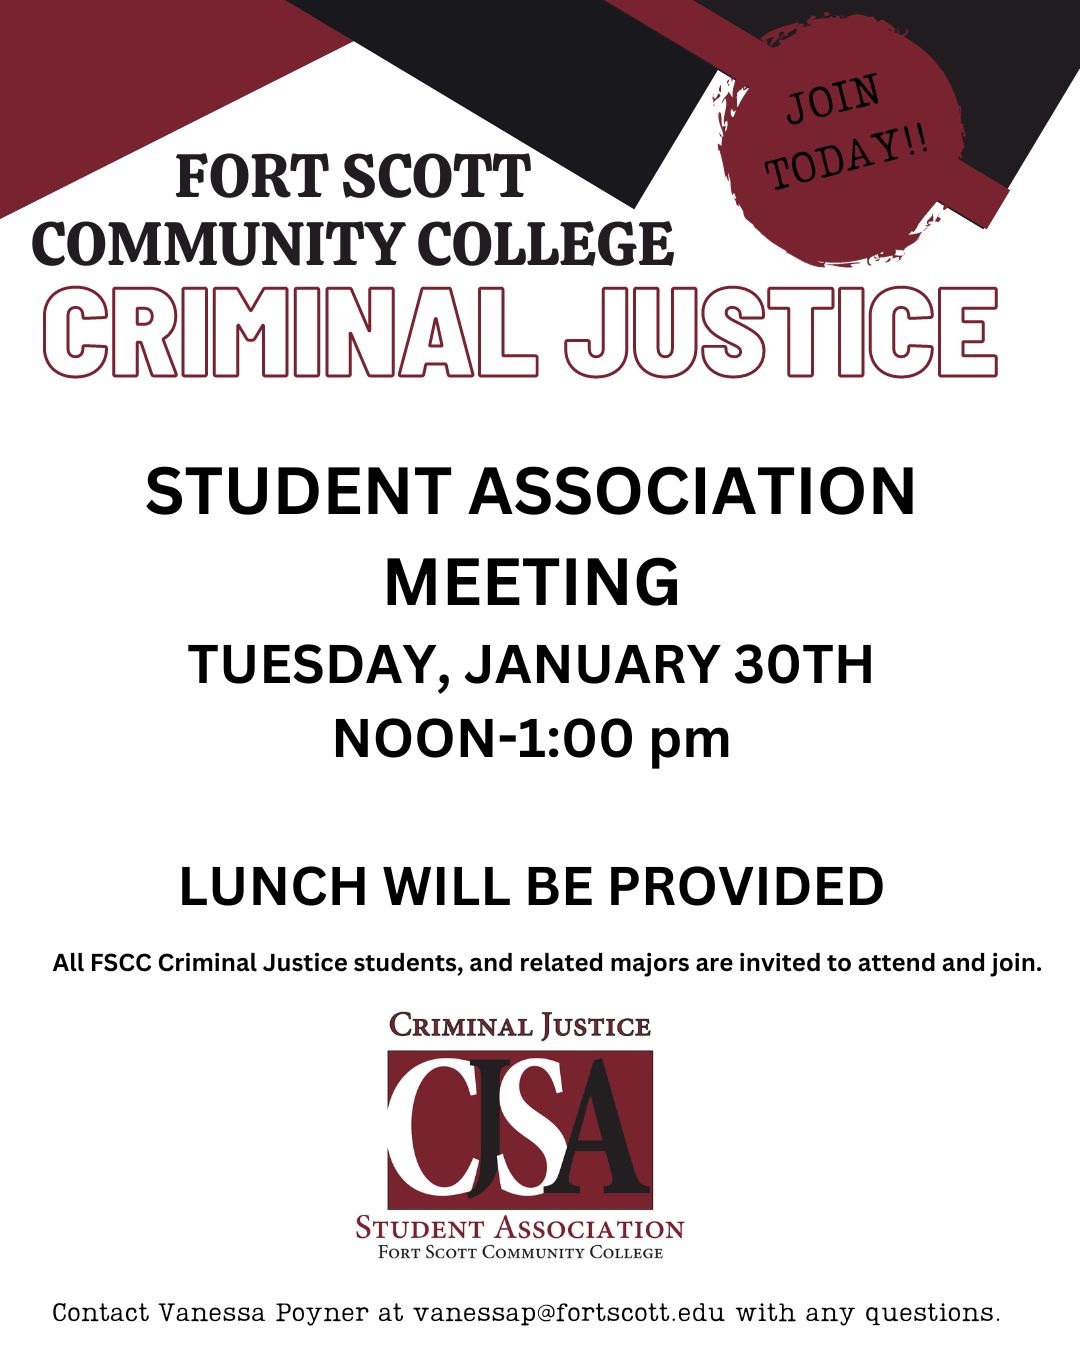 FORT SCOTT COMMUNITY COLLEGE STUDENT CRIMINAL JUSTICE. STUDENT ASSOCIATION MEETING TUESDAY, JANUARY 30TH NOON-1:00 pm LUNCH WILL BE PROVIDED All FSCC Criminal Justice students, and related majors are invited to attend and join. Contact Vanessa Poyner at vanessap@fortscott.edu with any questions. CJSA logo is attached at the bottom.